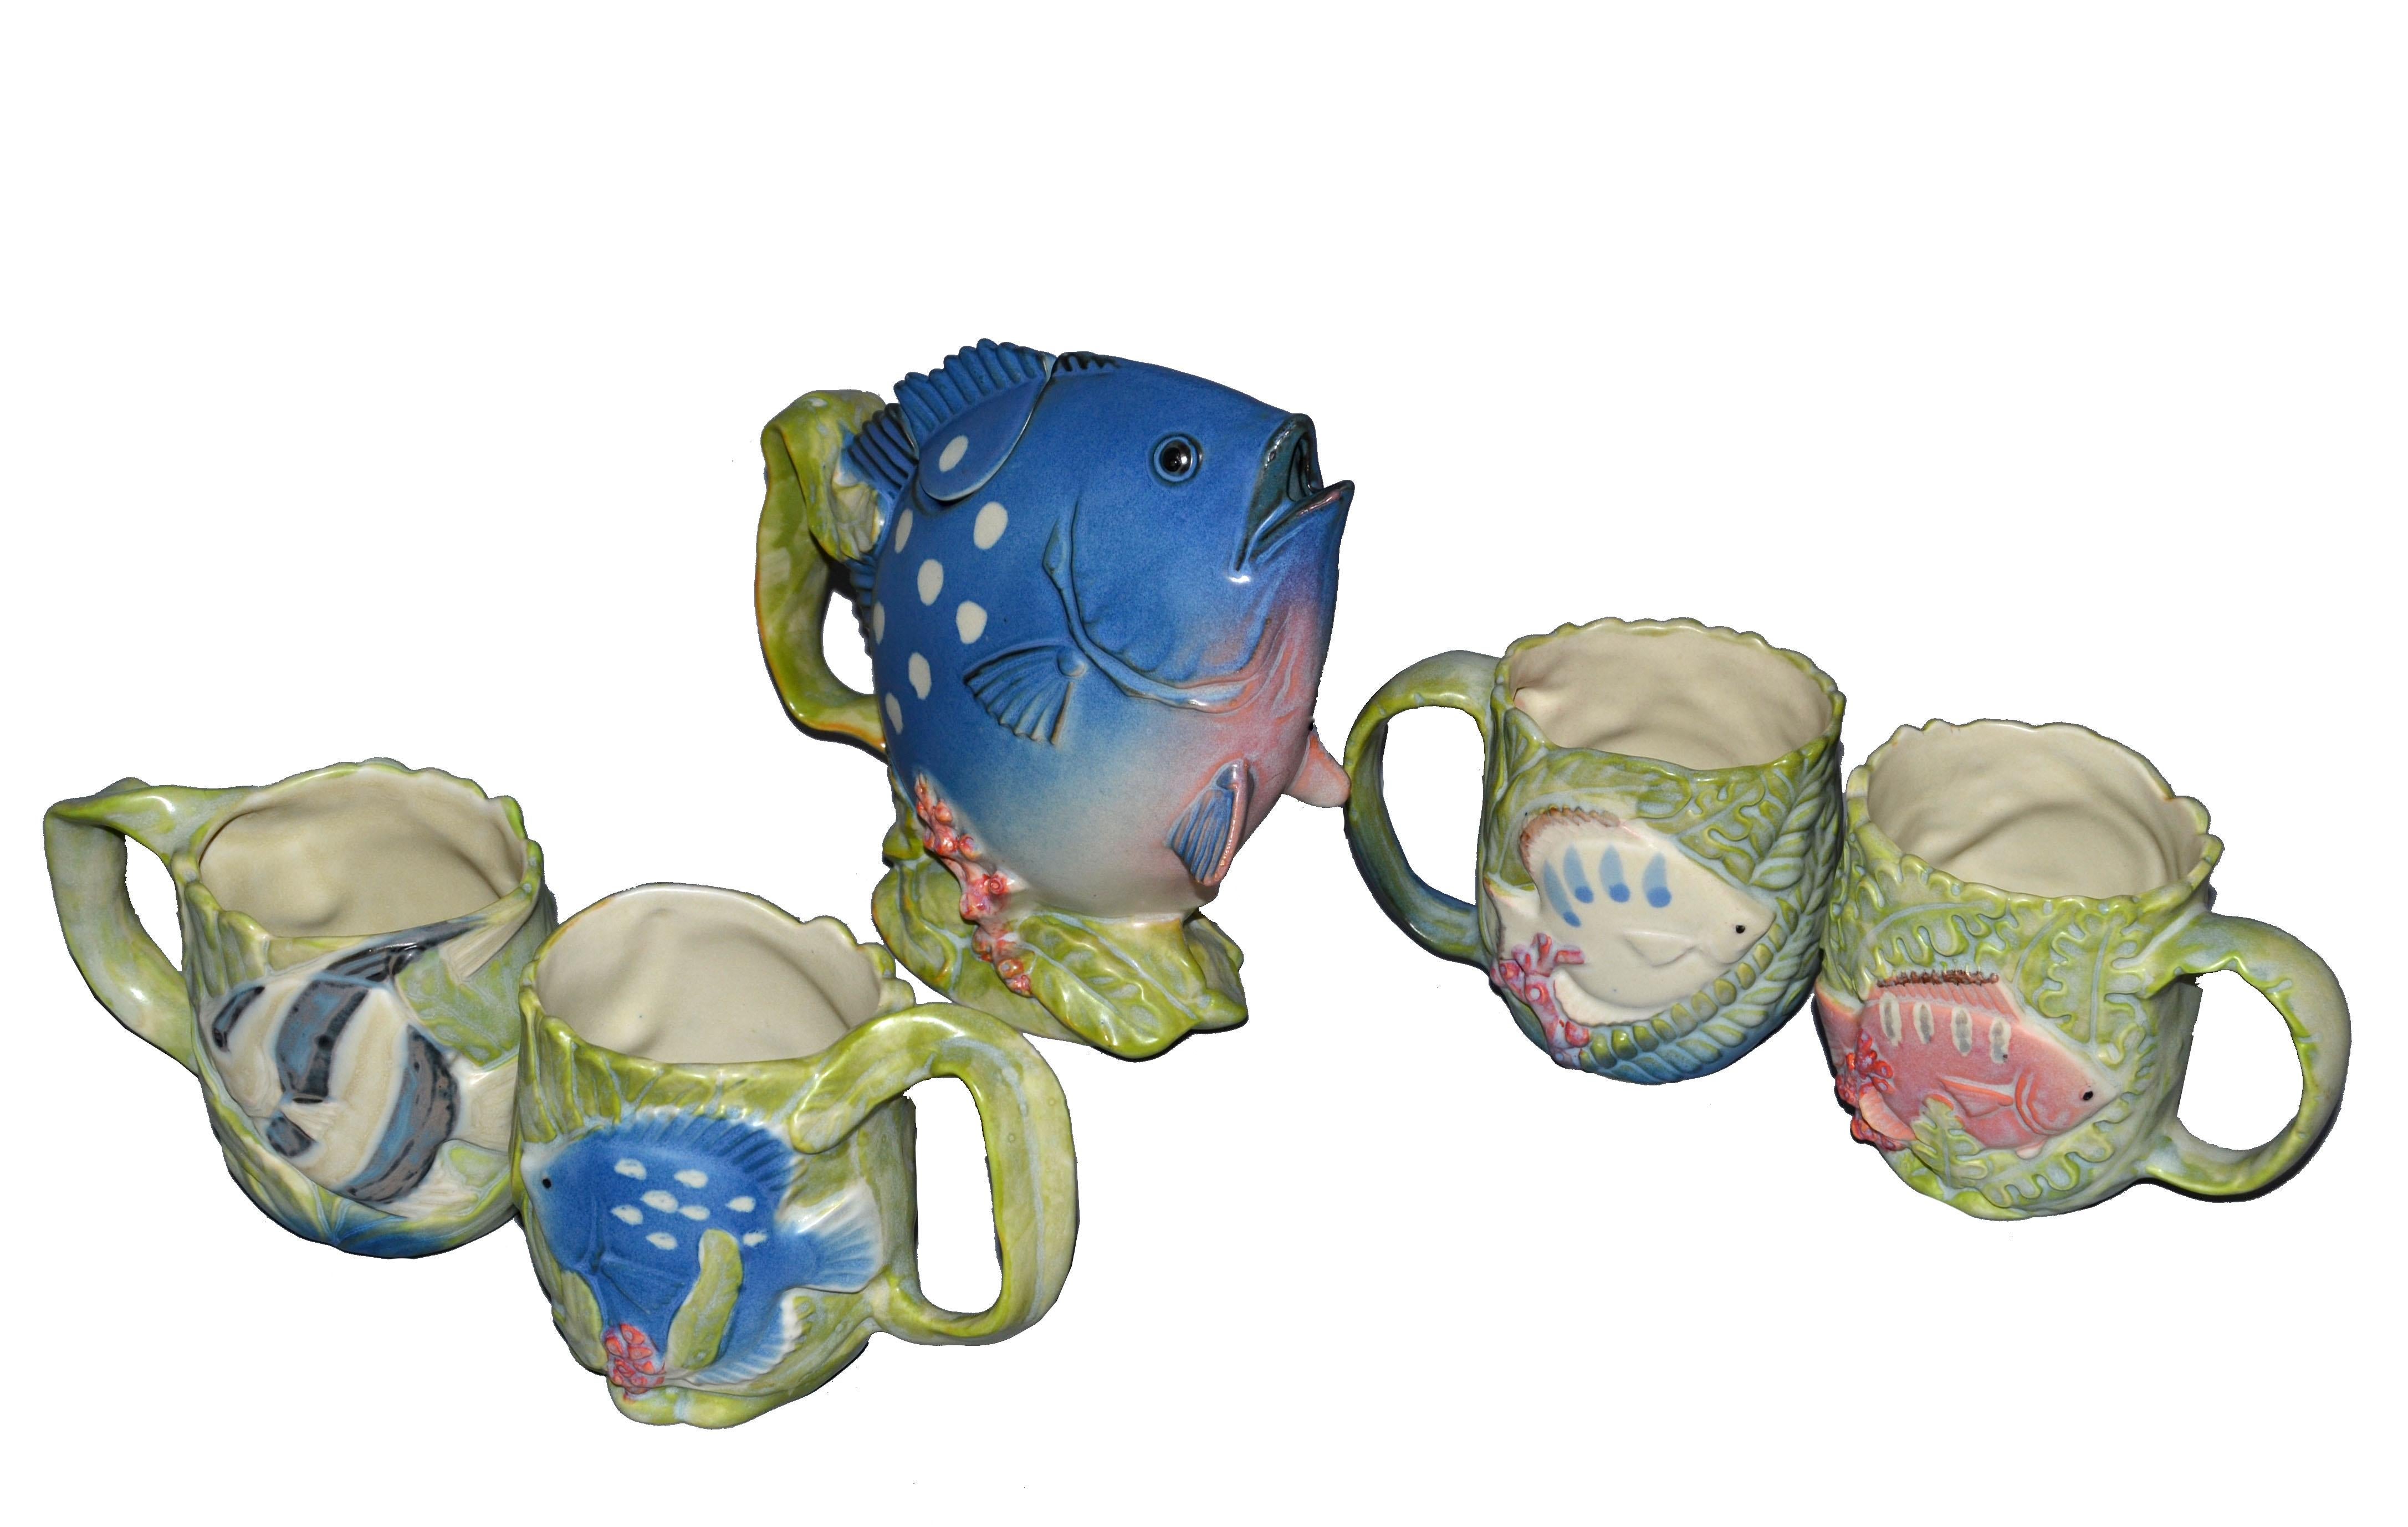 5 pieces pottery tea set vintage Japanese Takahashi San Francisco California.
Hand painted fish form teapot and four tea cups or mugs with a fish on each side.
Each cup or mug has two different colored fish motives in relief.
All pieces are